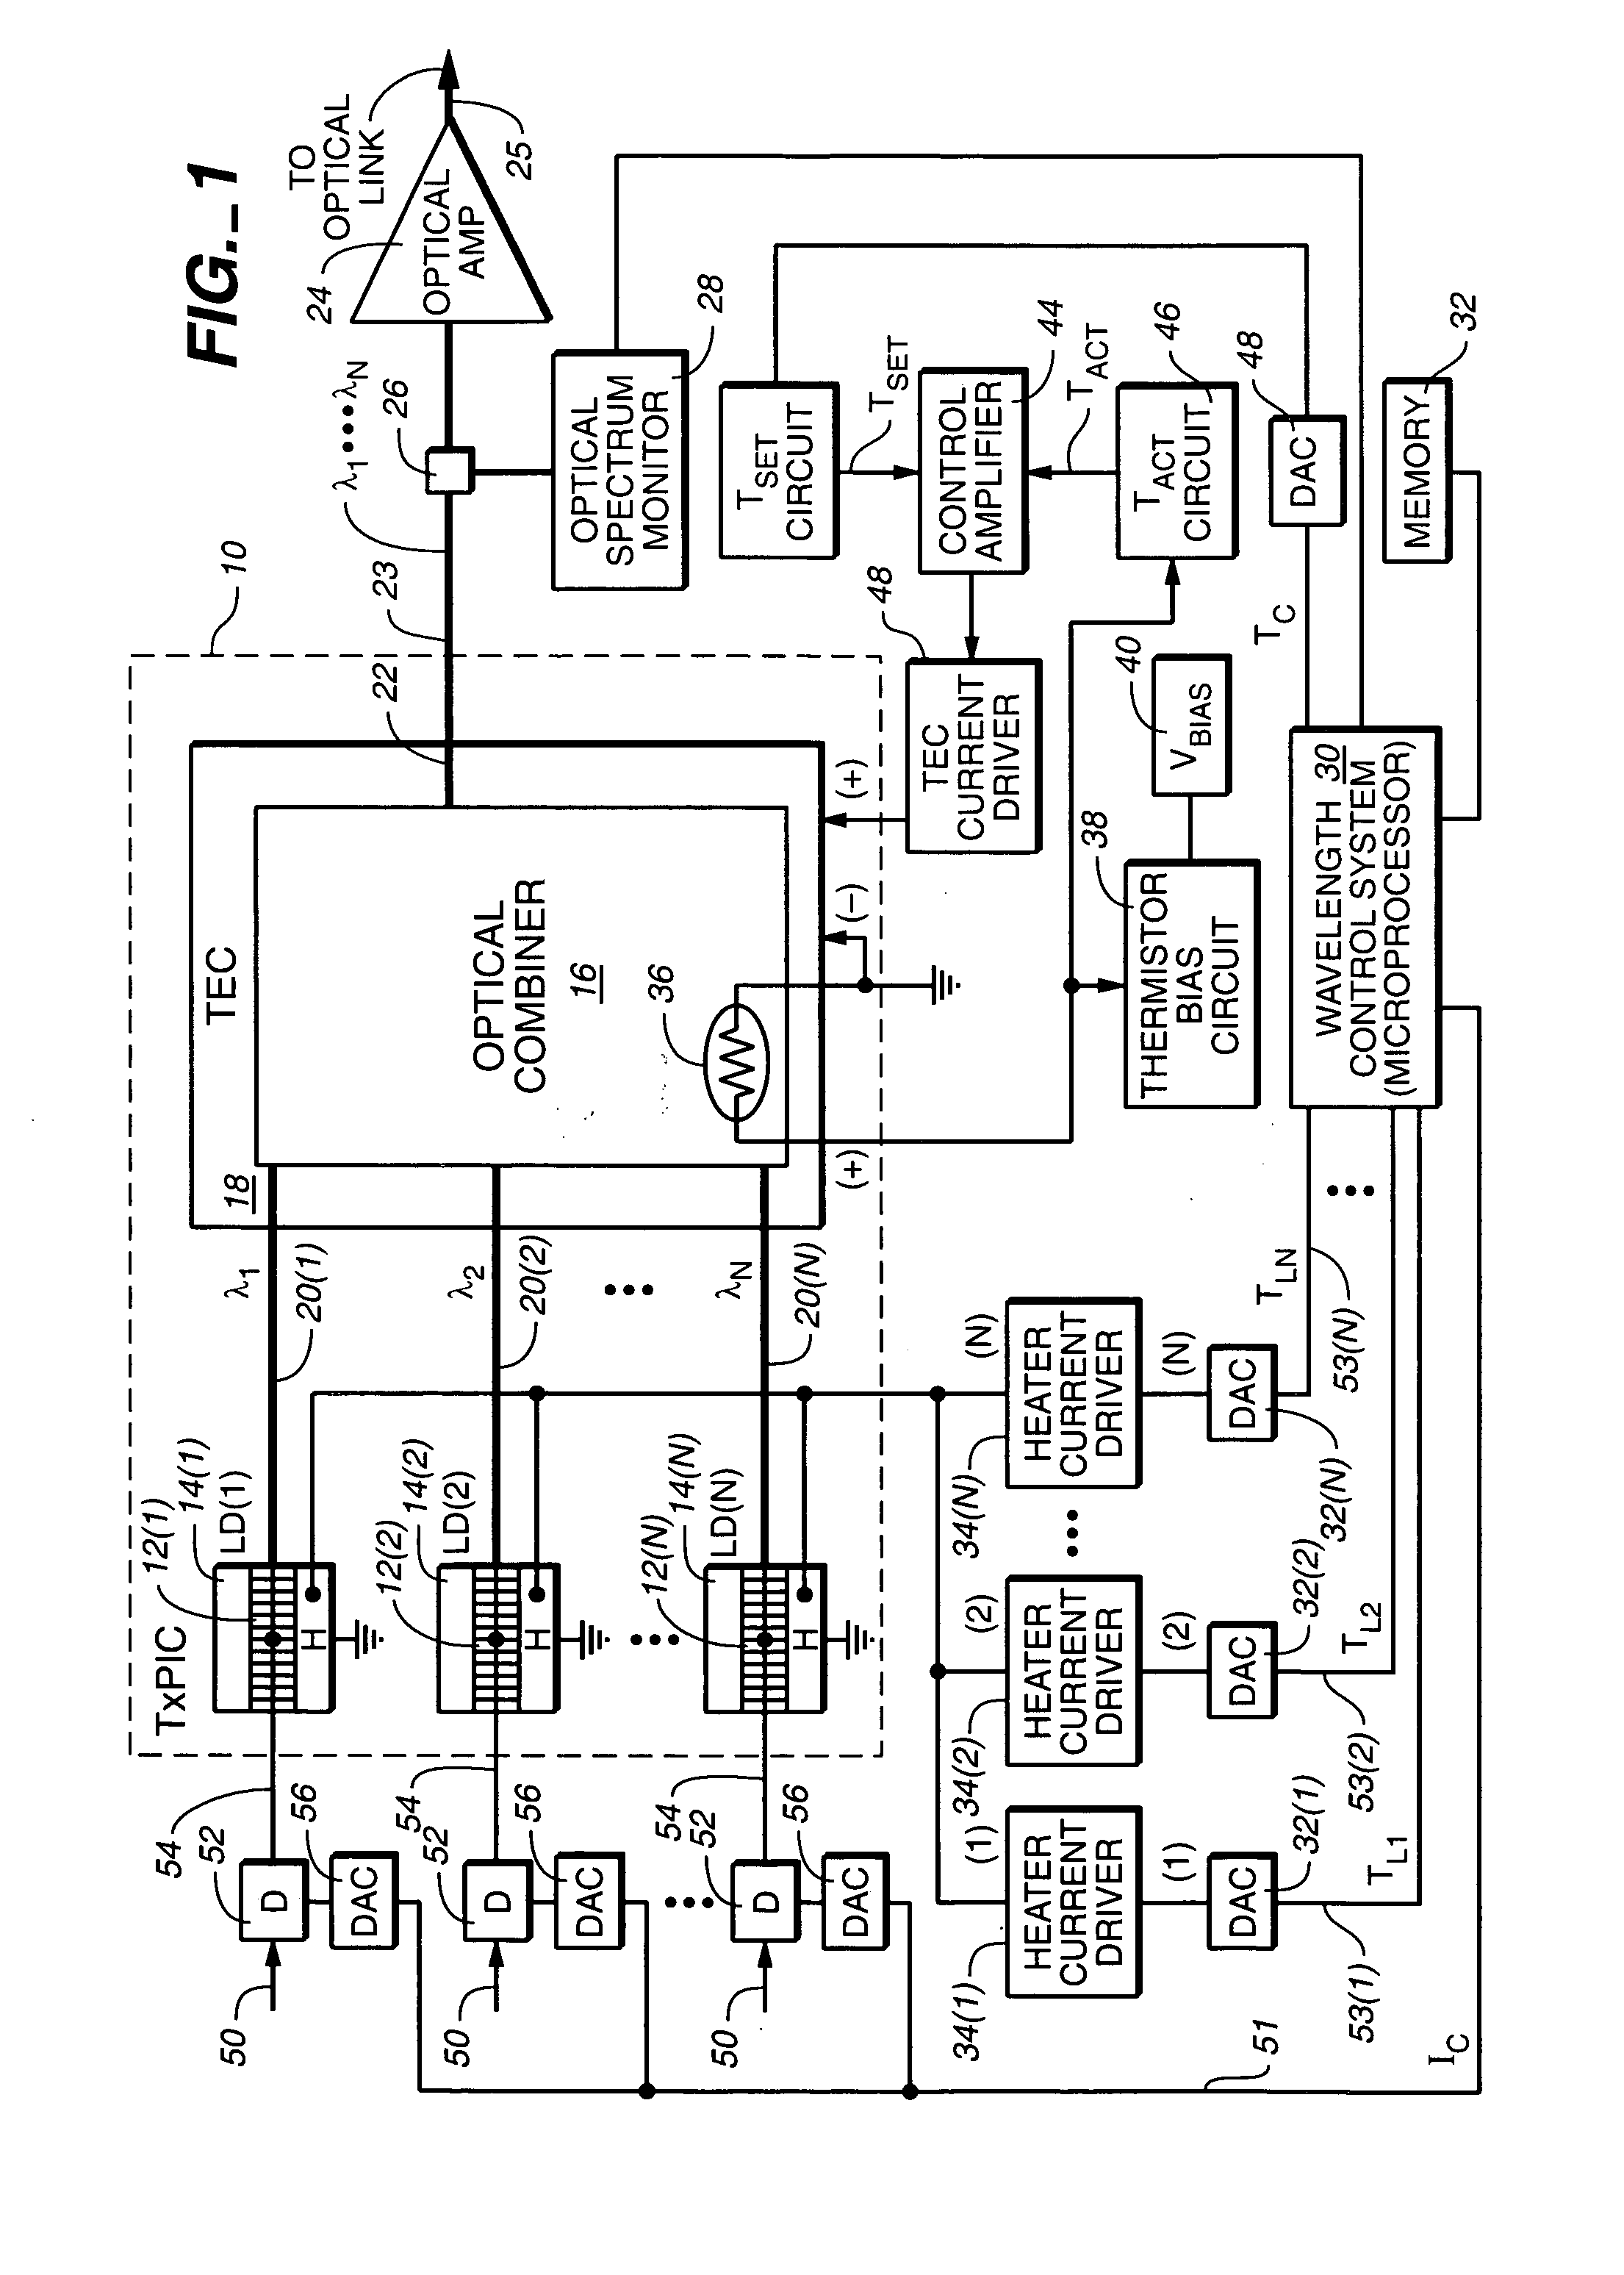 Method of operating an array of laser sources integrated in a monolithic chip or in a photonic integrated circuit (PIC)